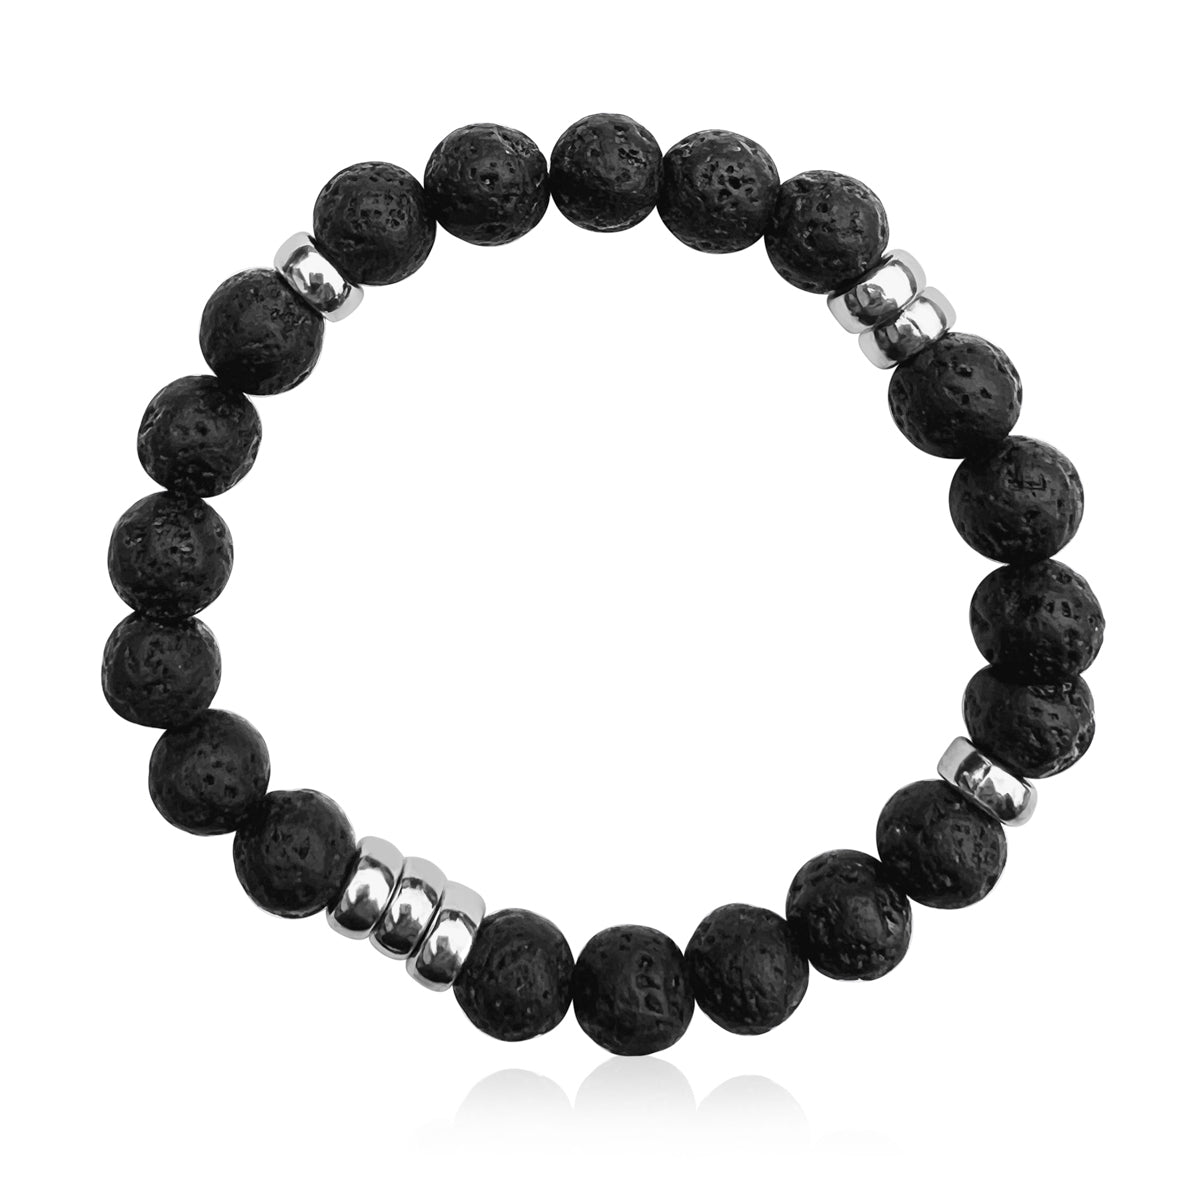 The "Grounded Healing Lava Bracelet" is more than just an accessory; it's a wearable source of tranquility and renewal.